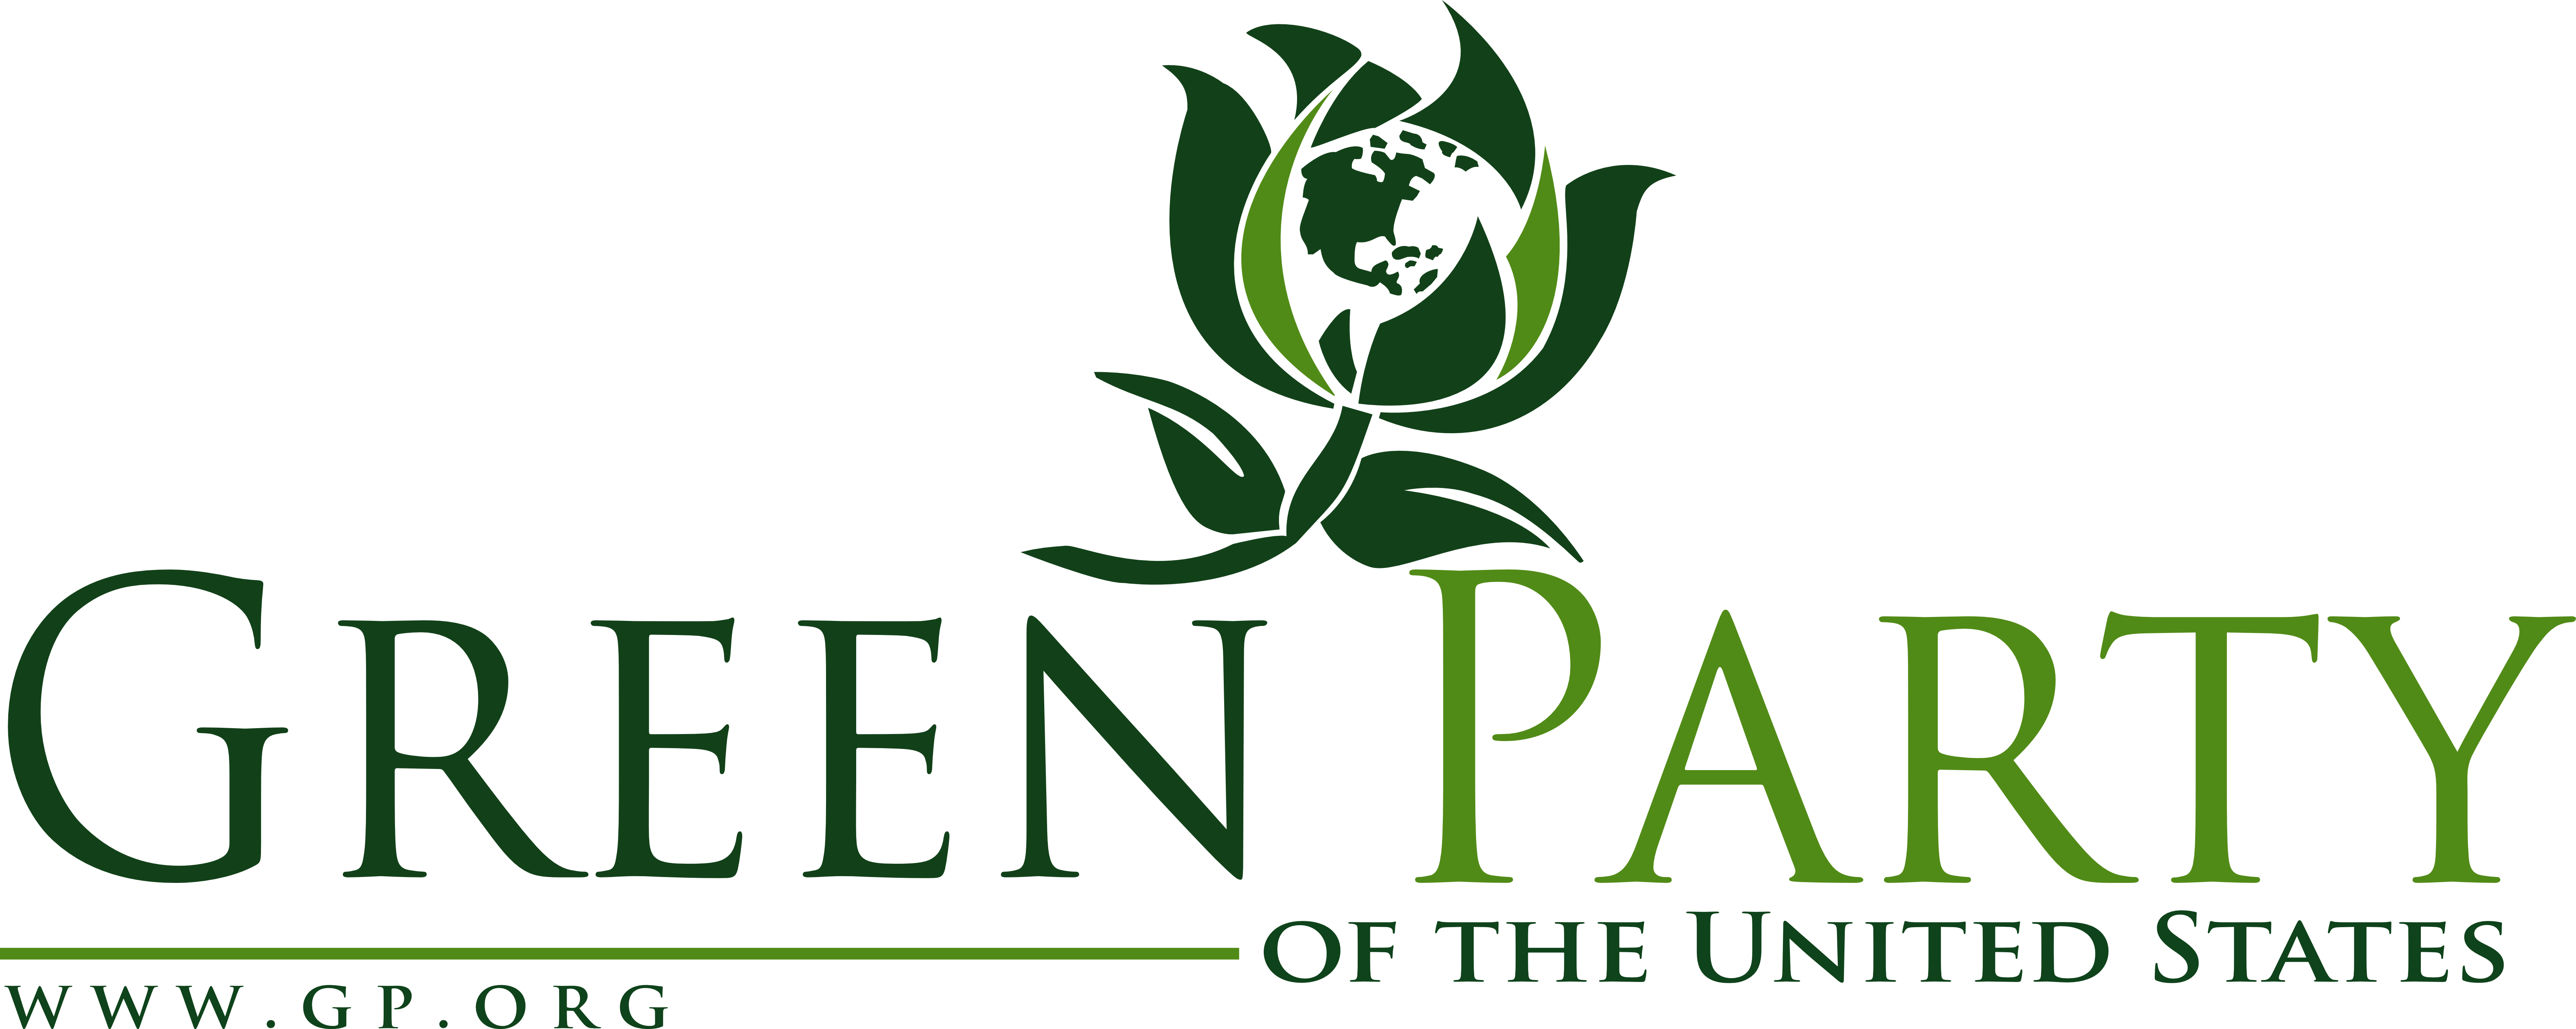 Green Party Of The United States Logo (6574x2627)